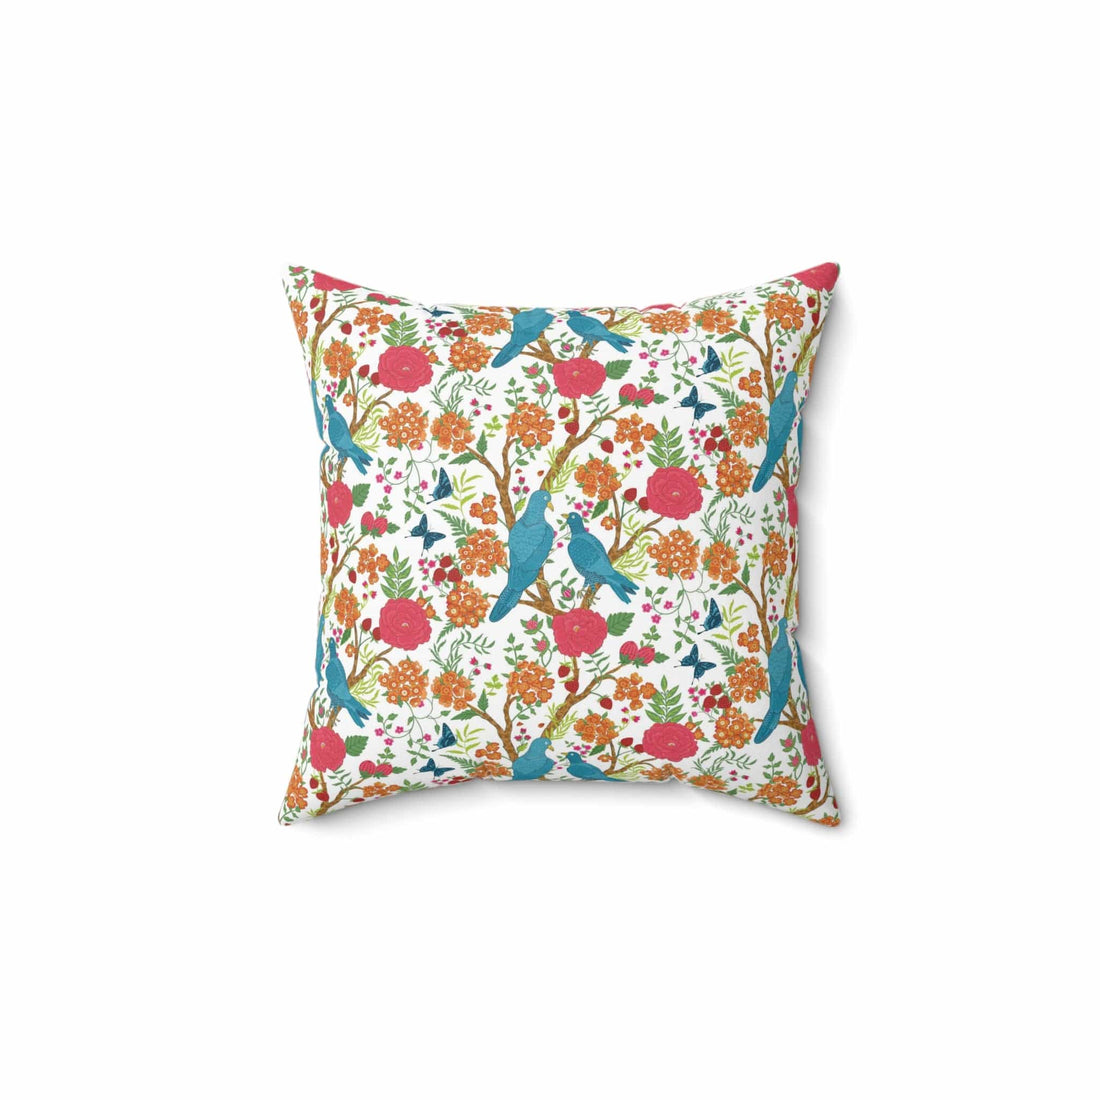 Kate McEnroe New York Chinoiserie Tropical Bird Garden Pillow with Insert, Floral Cushion, Botanical Bird Throw Pillow KM13809924Throw Pillows12261909374163439717